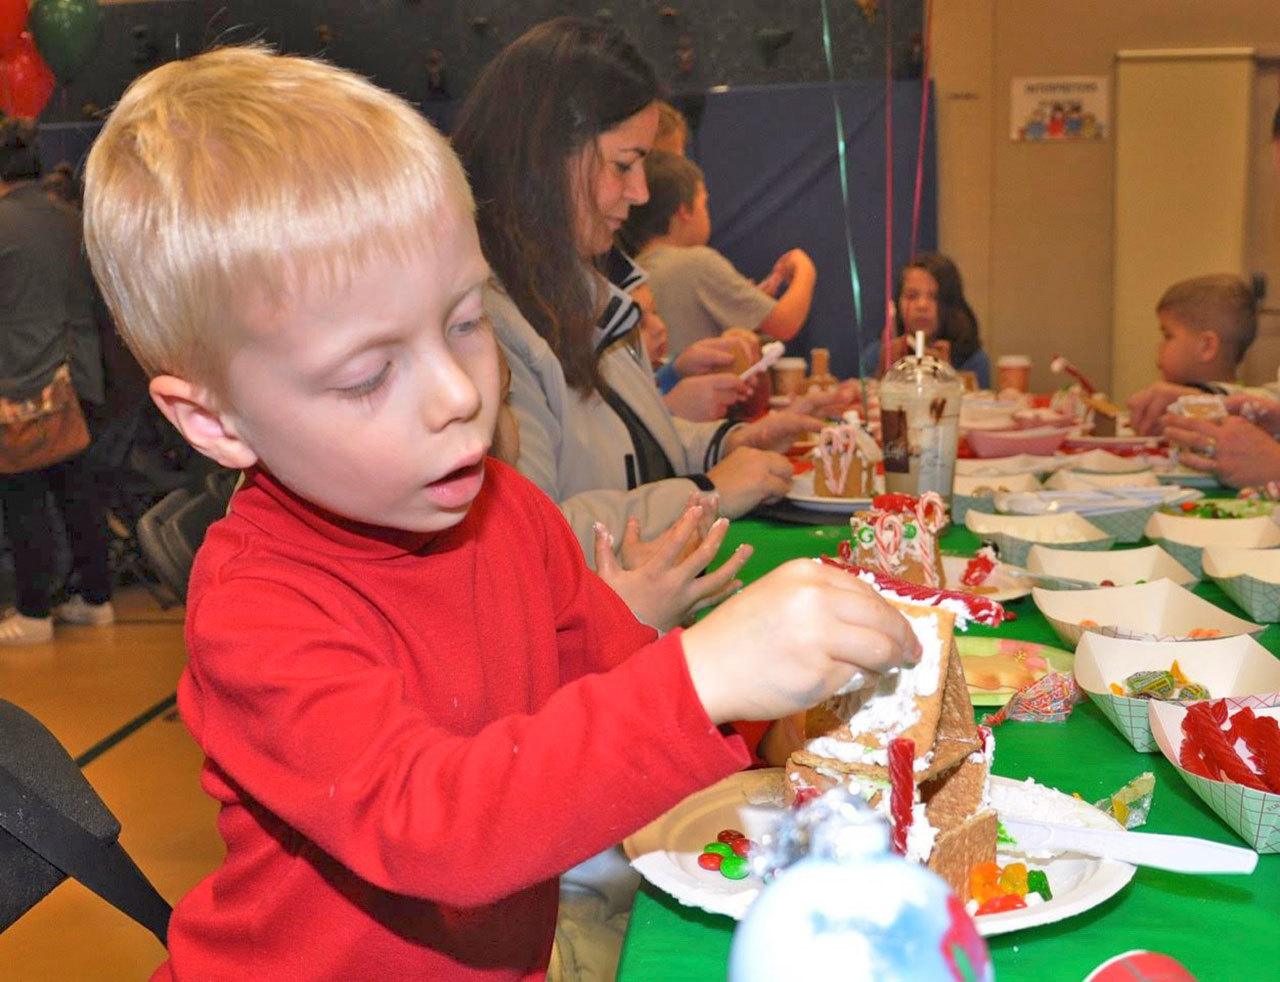 The Holiday Snack and Craft is back at Washington Elementary on Saturday, Dec. 3. Families and kids can create fun holiday gingerbread houses and ornaments. RACHEL CIAMPI, Auburn Reporter